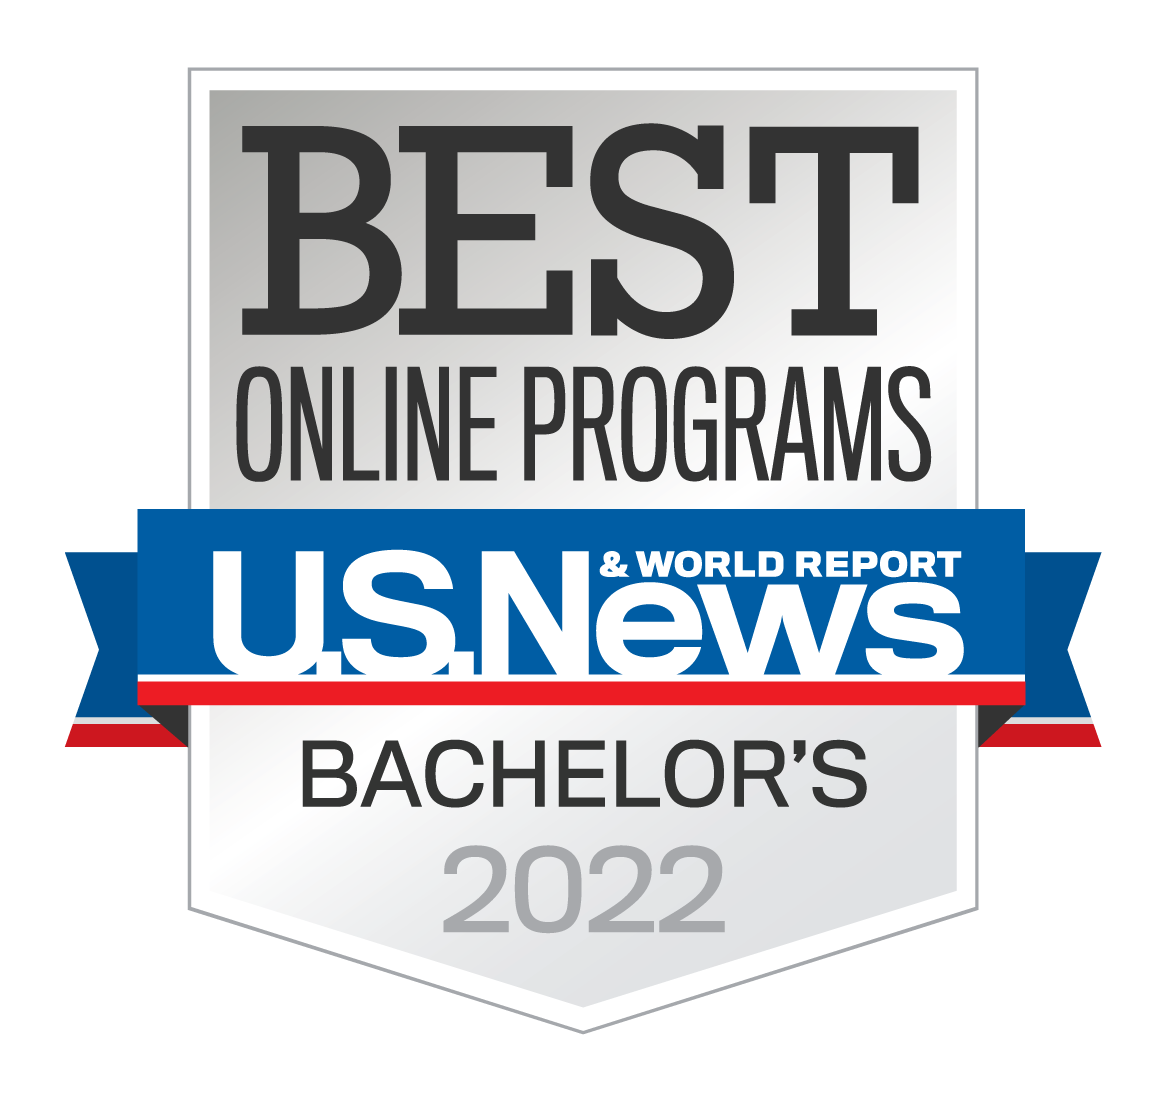 U.S. New and world reports. Best Online Programs: Bachelor's